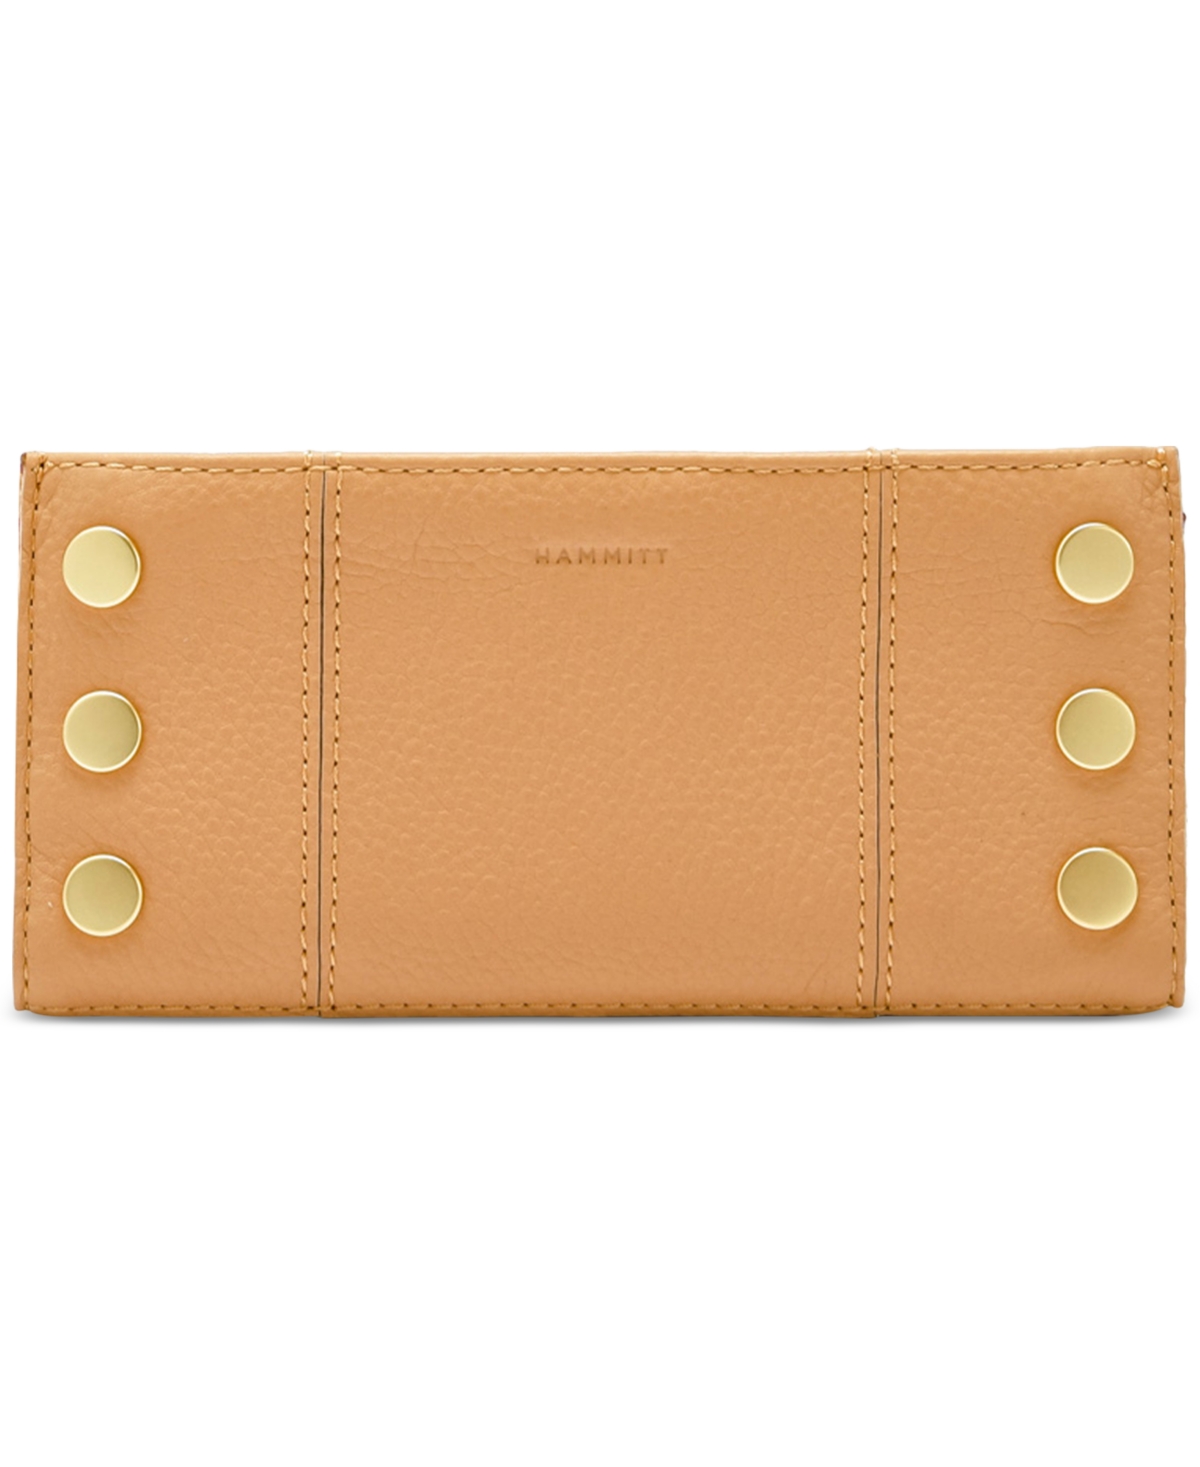 110 North Leather Wallet - Bungalow B